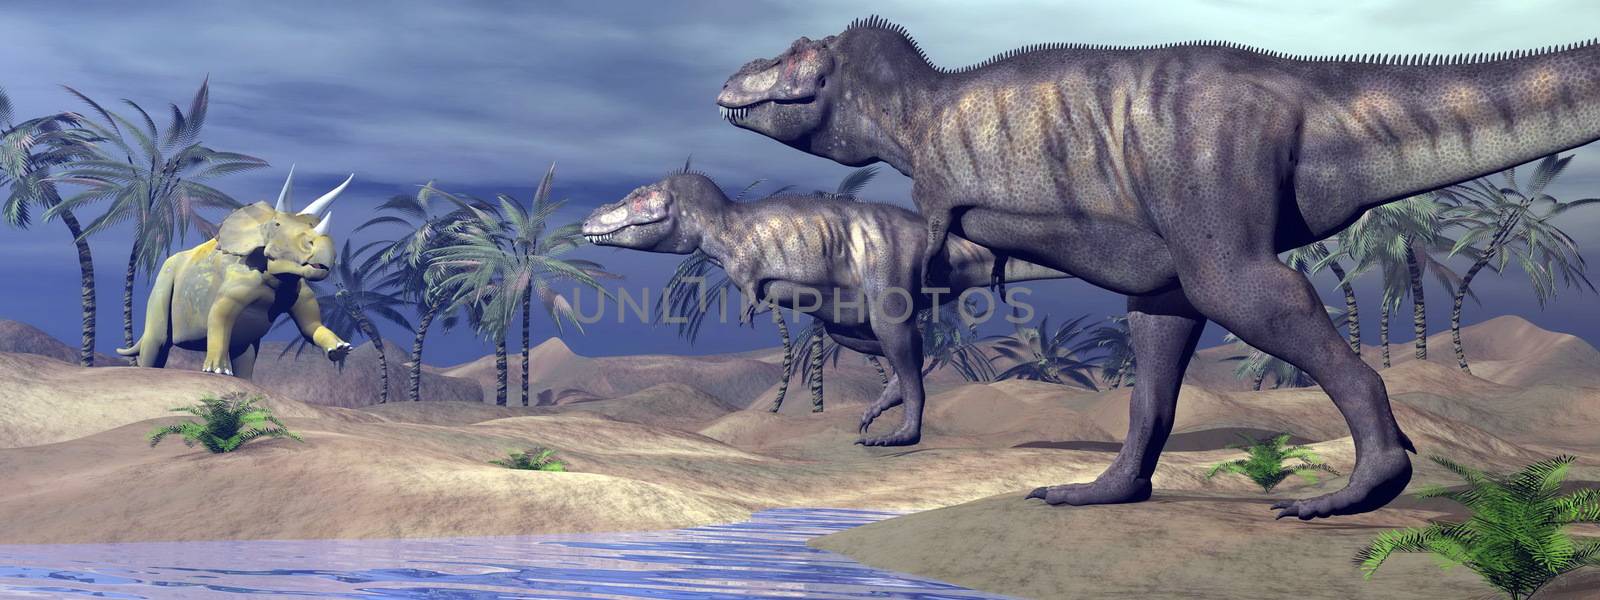 Two tyrannosaurus attacking one triceratops dinosaur in desertic landscape with palm trees and water by night